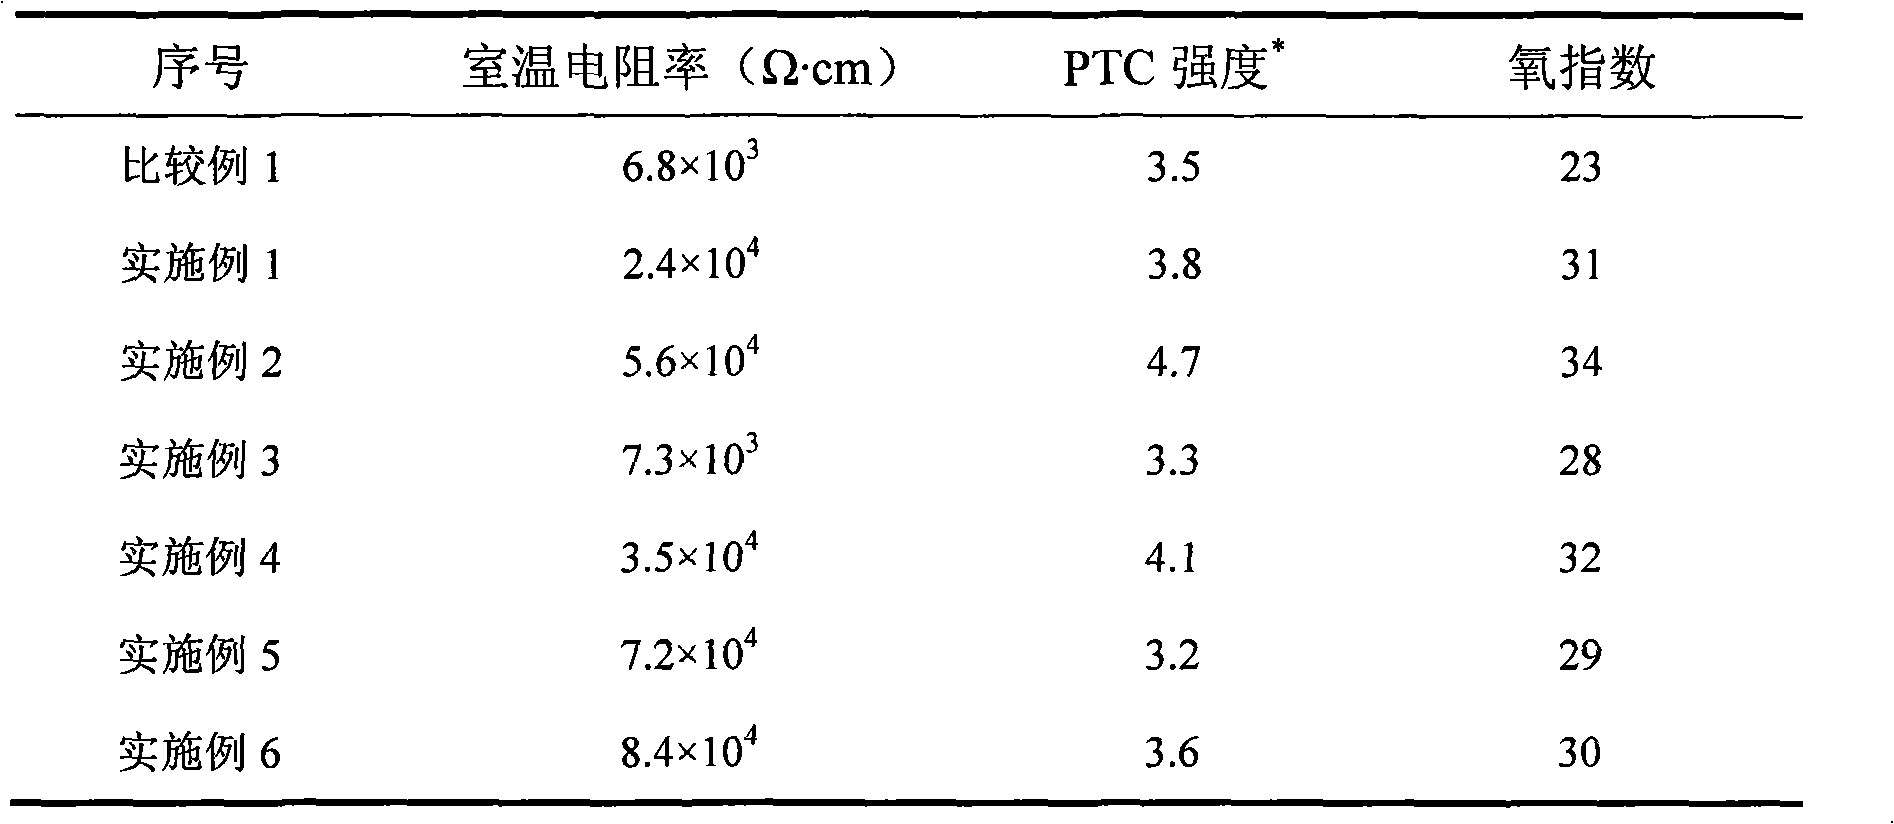 Composition of flame retardant conductive polymer